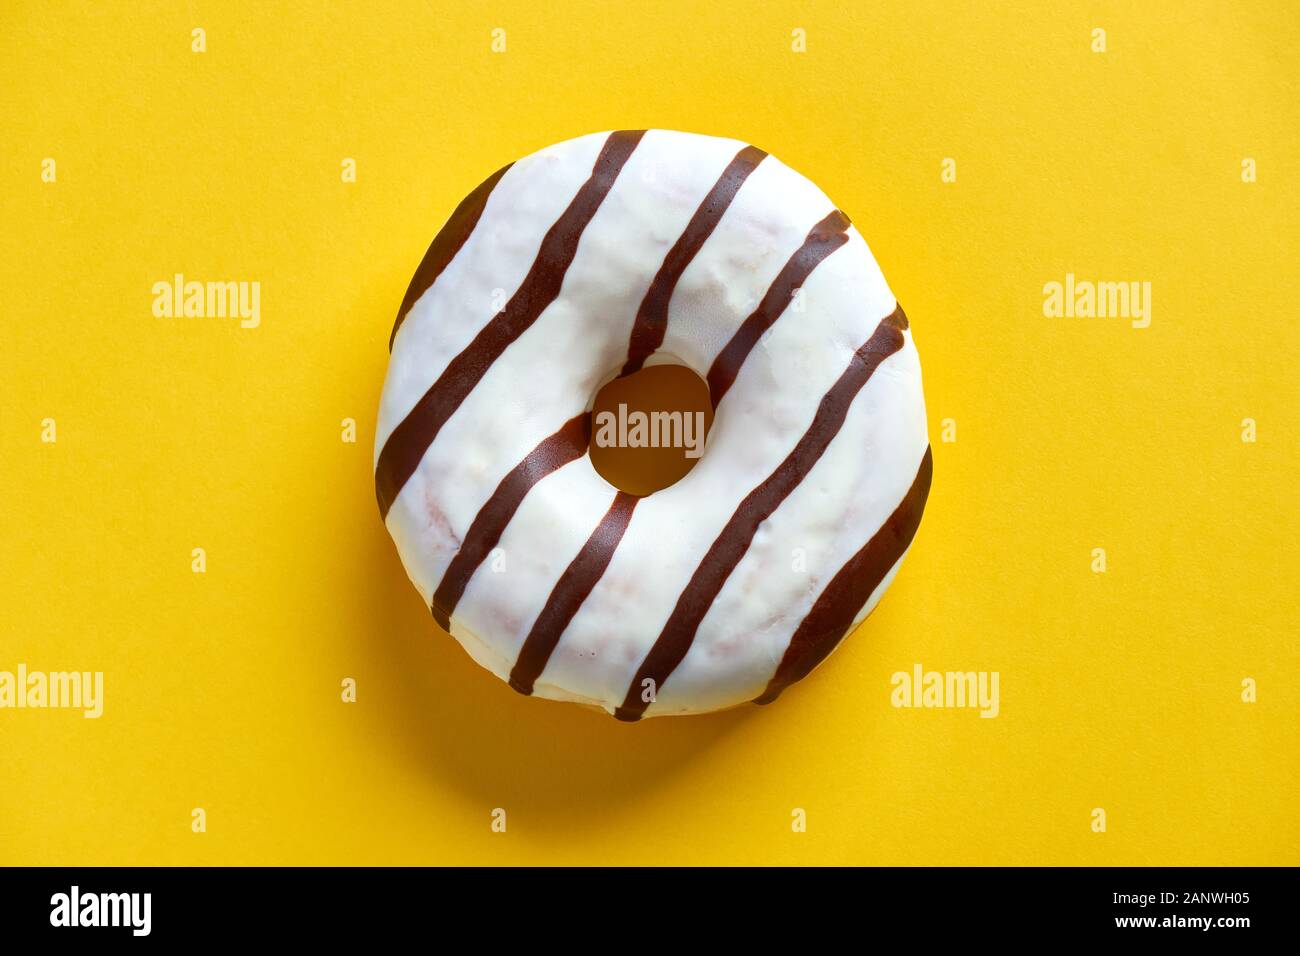 One single round donut with white ice glazing and stripes of dark brown chocolate on a yellow background with copy space. Flat lay. Stock Photo